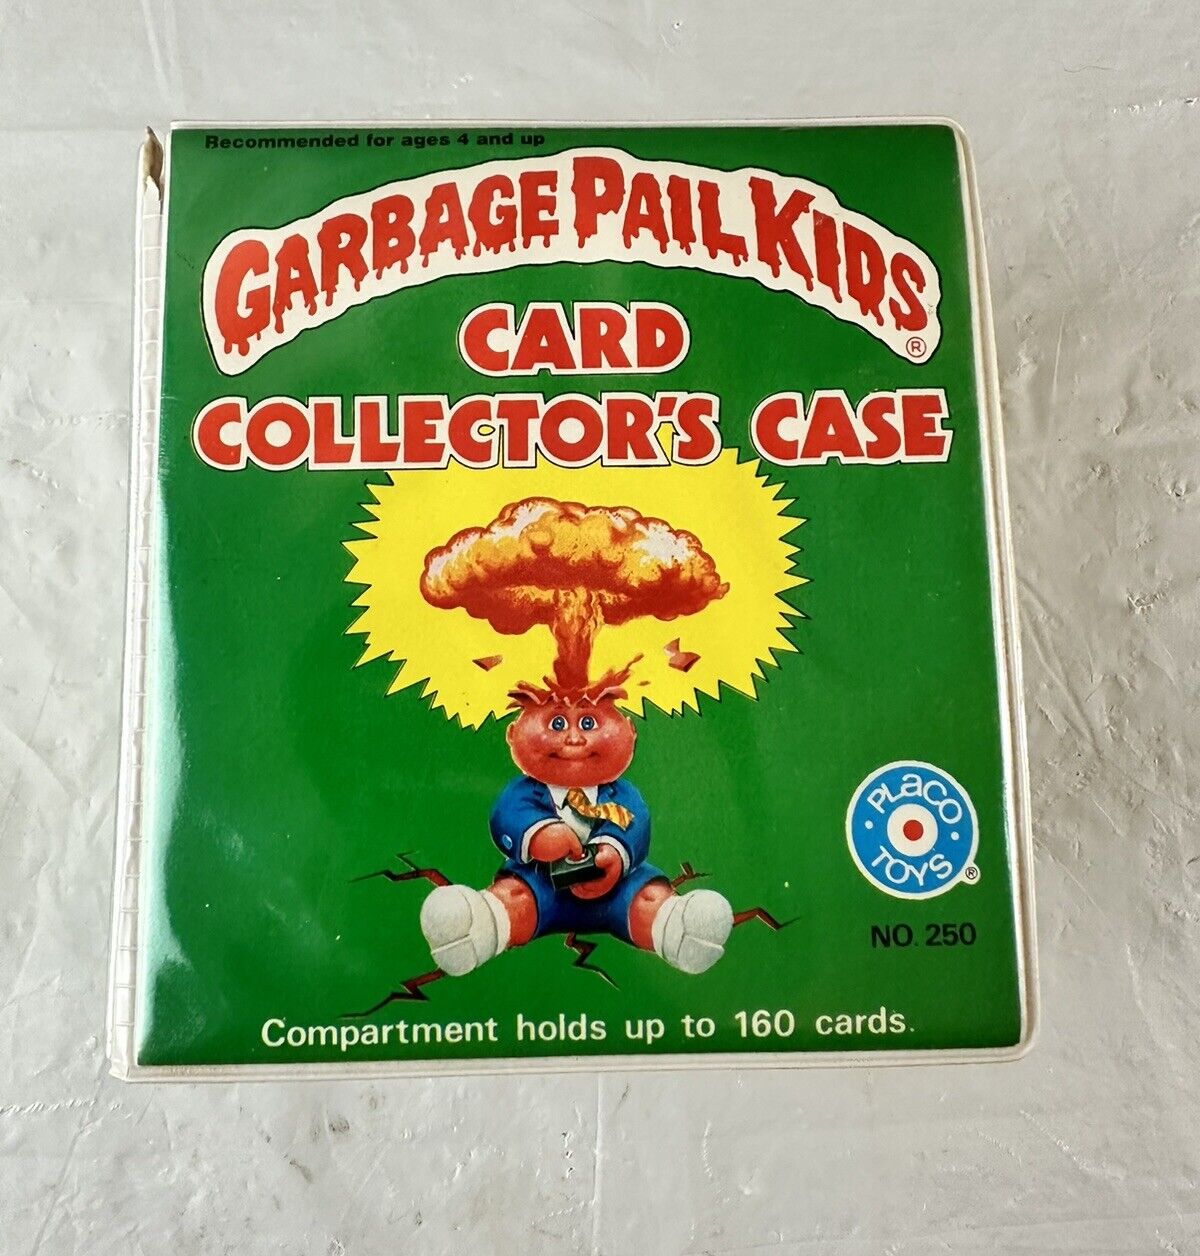 Garbage Pail Kids 1986 Card Collector\'s Case Placo Toys Vintage Topps GPK 